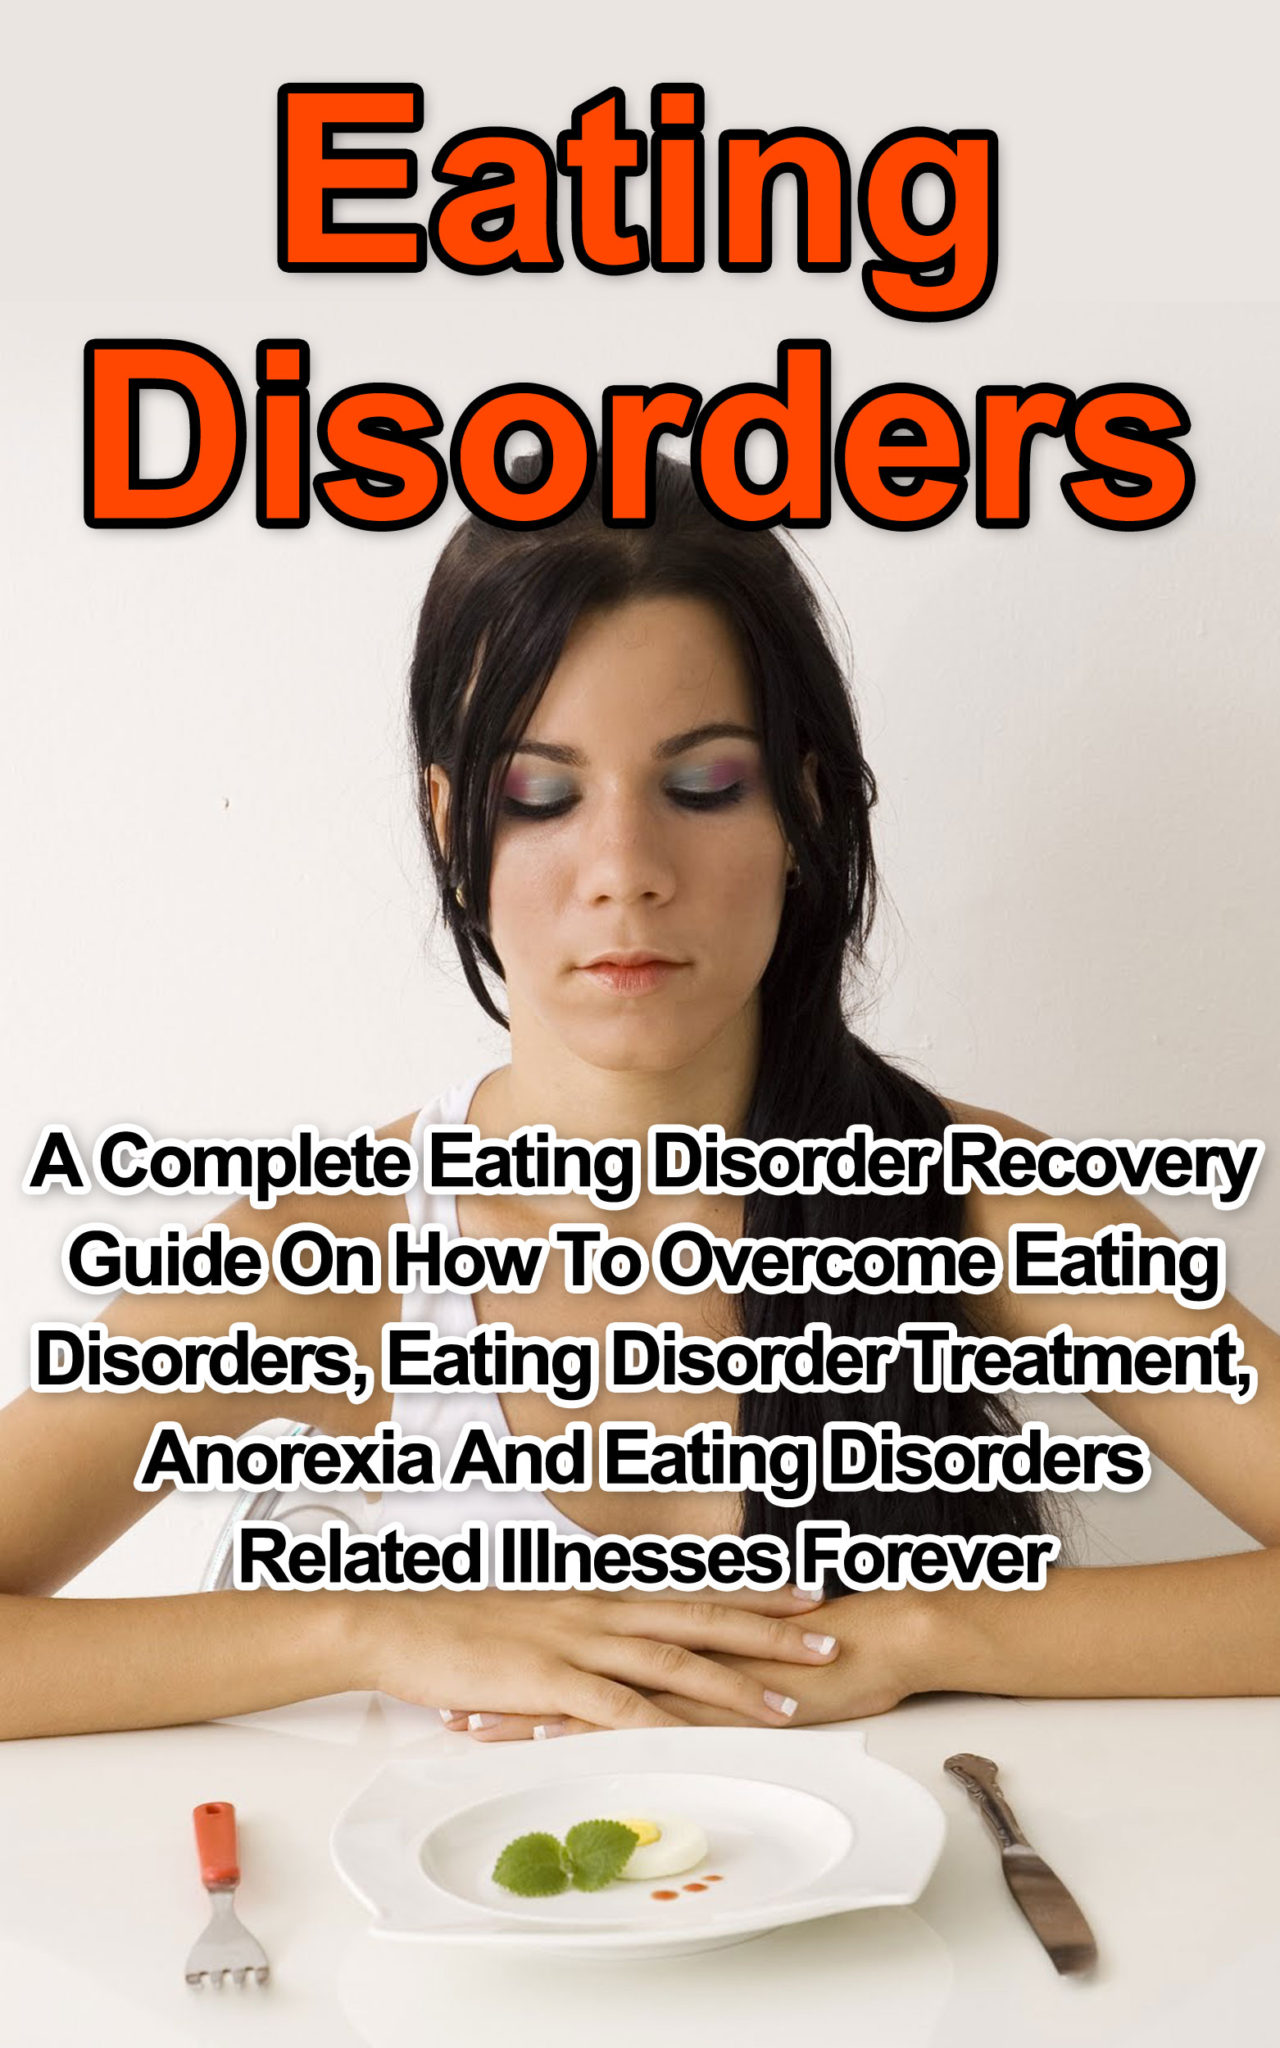 Eating Disorders by Grant